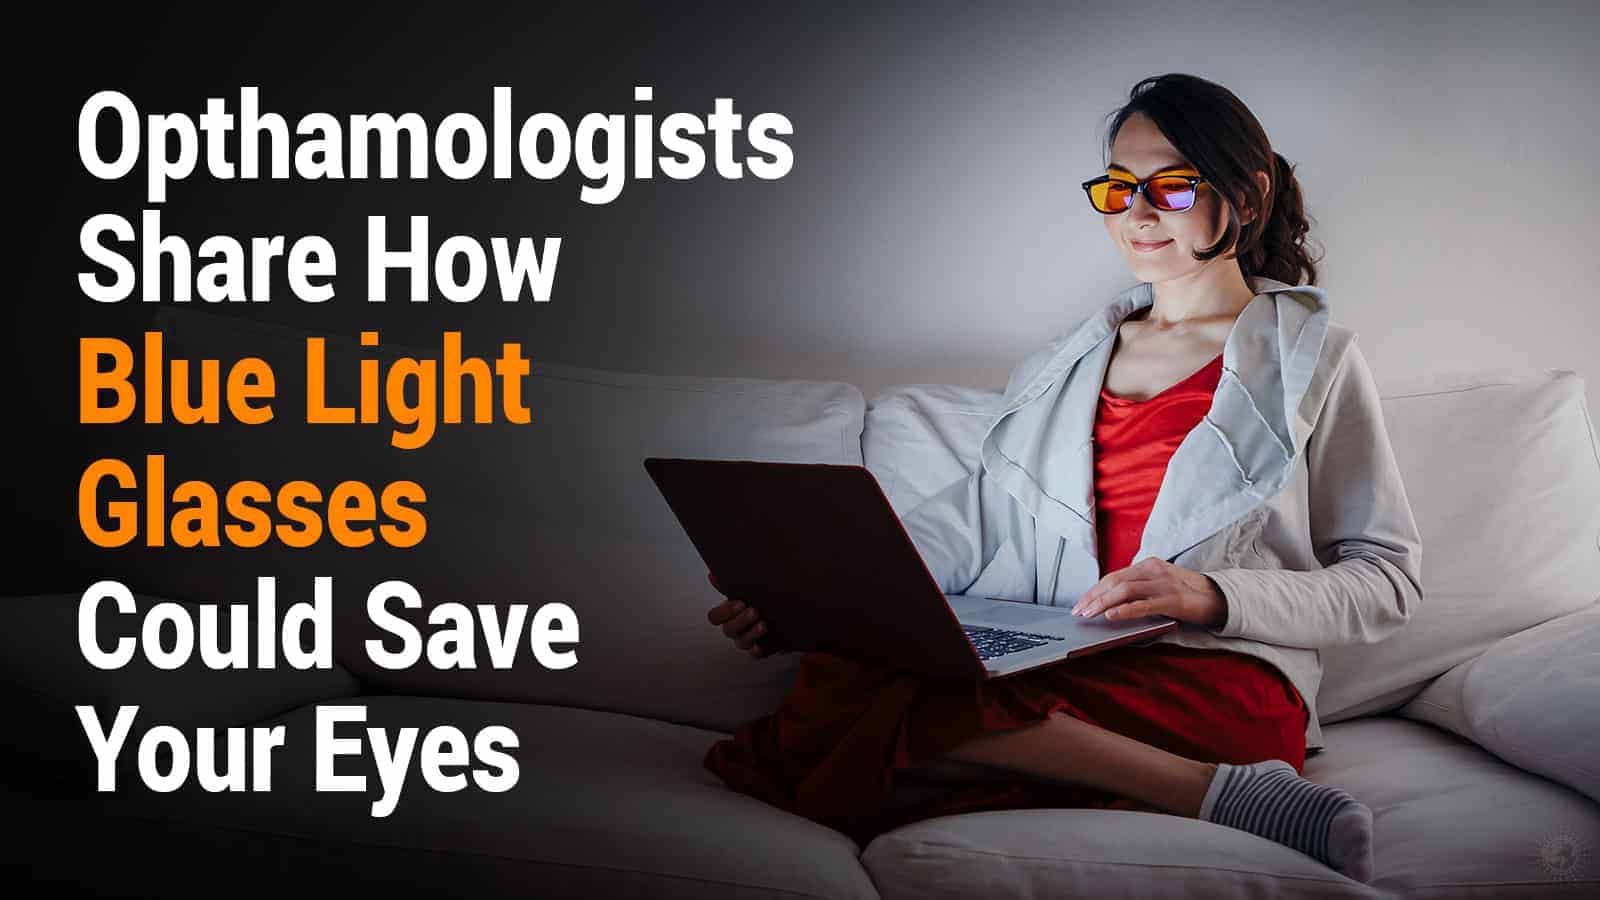 Opthamologists Share How Blue Light Glasses Could Save Your Eyes